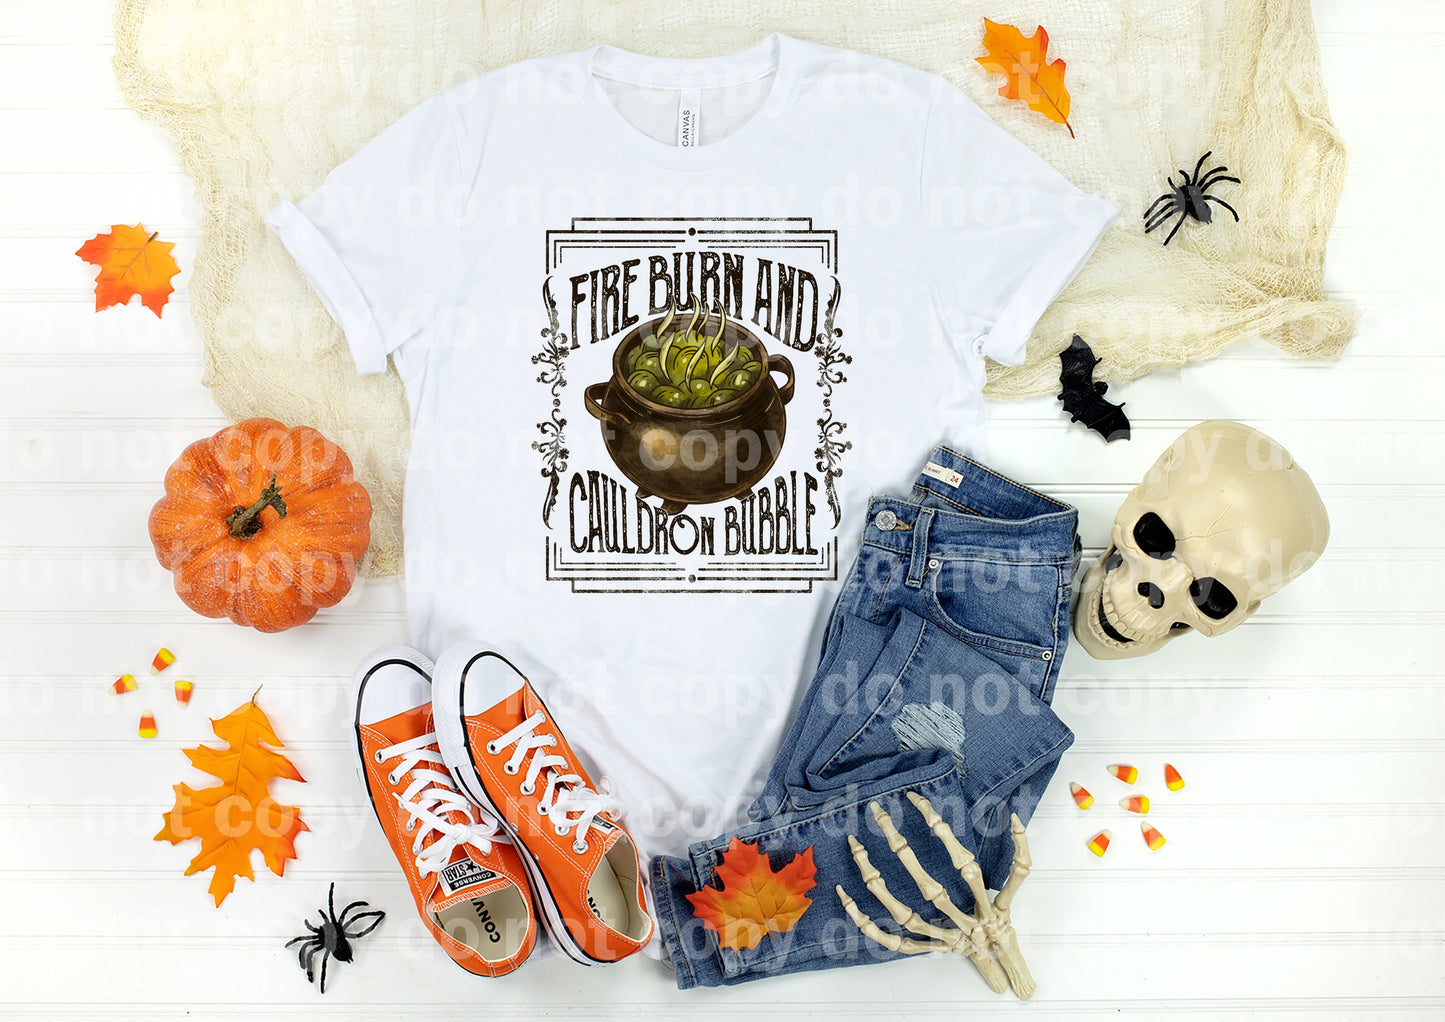 Fire Burn and Cauldron Bubble with Optional Sleeve Design Dream Print or Sublimation Print